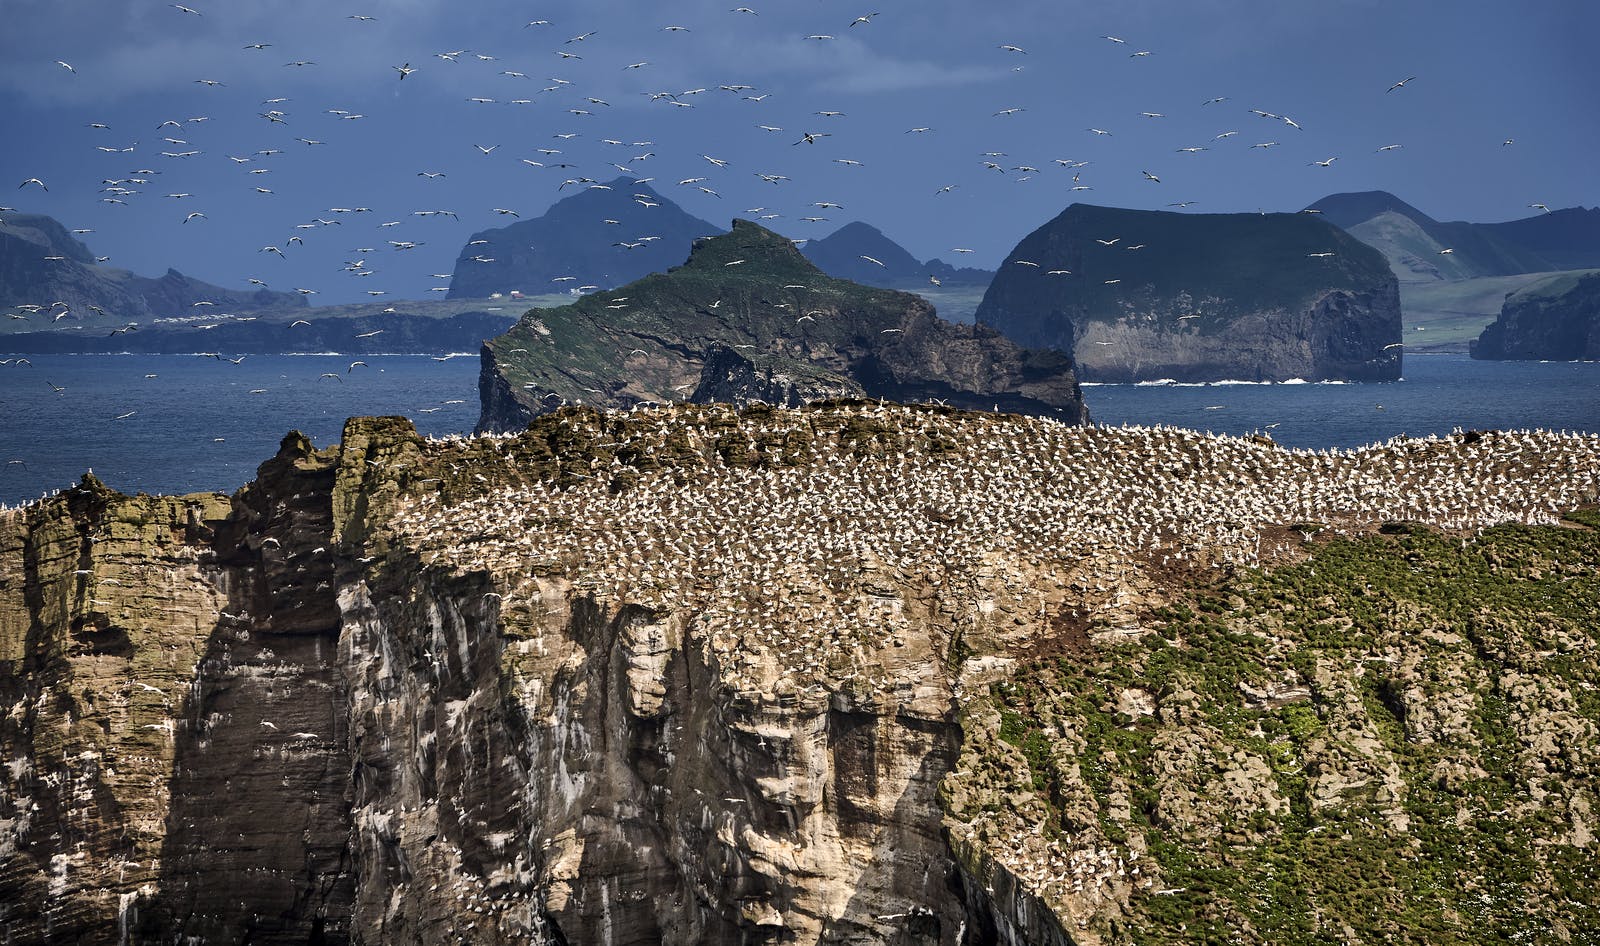 Seabird Colony in Iceland